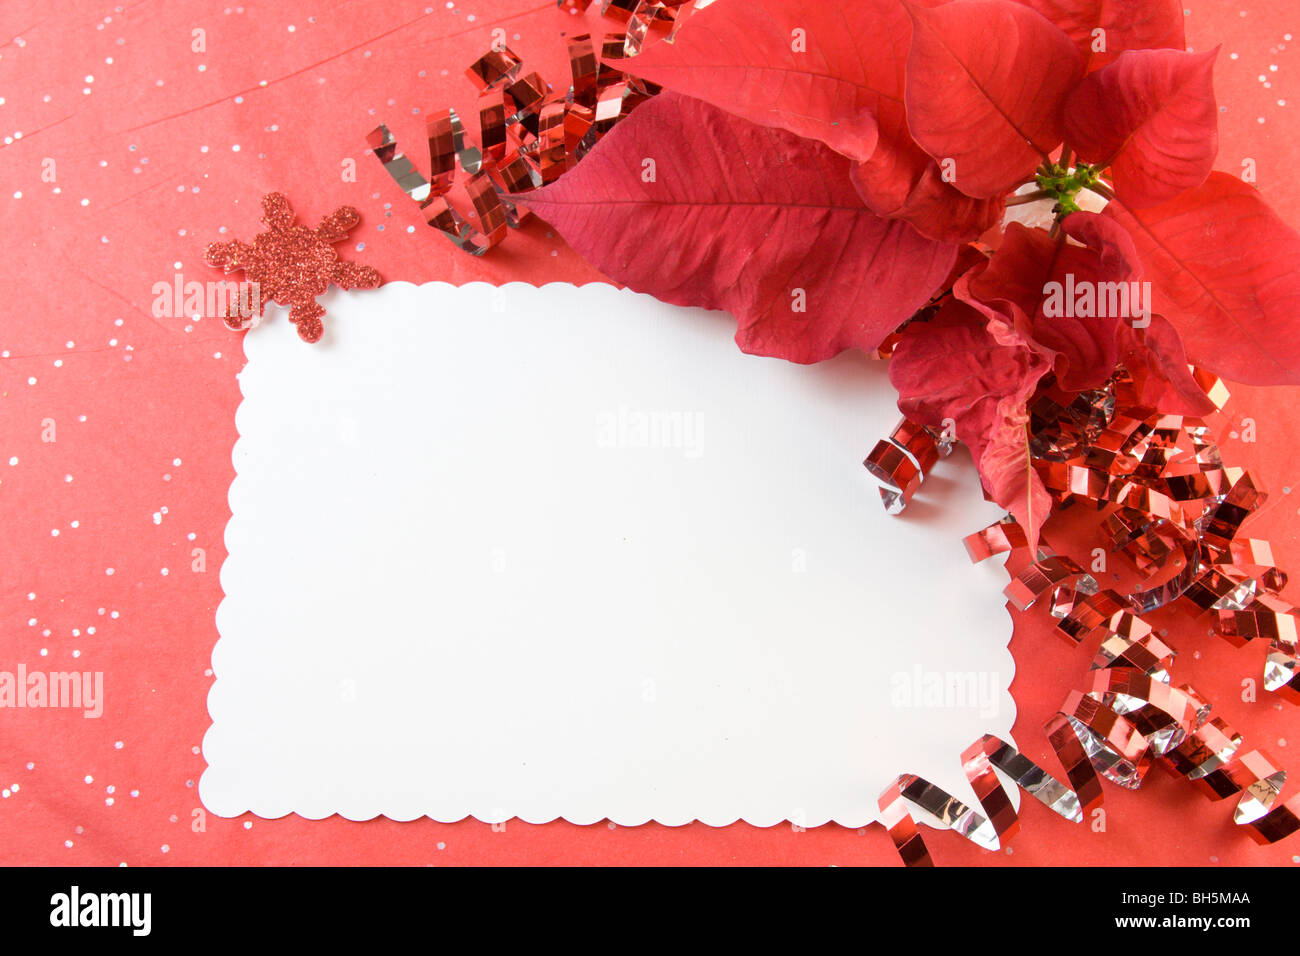 blank Christmas card with poinsettia, red metallic ribbon, and copy space Stock Photo